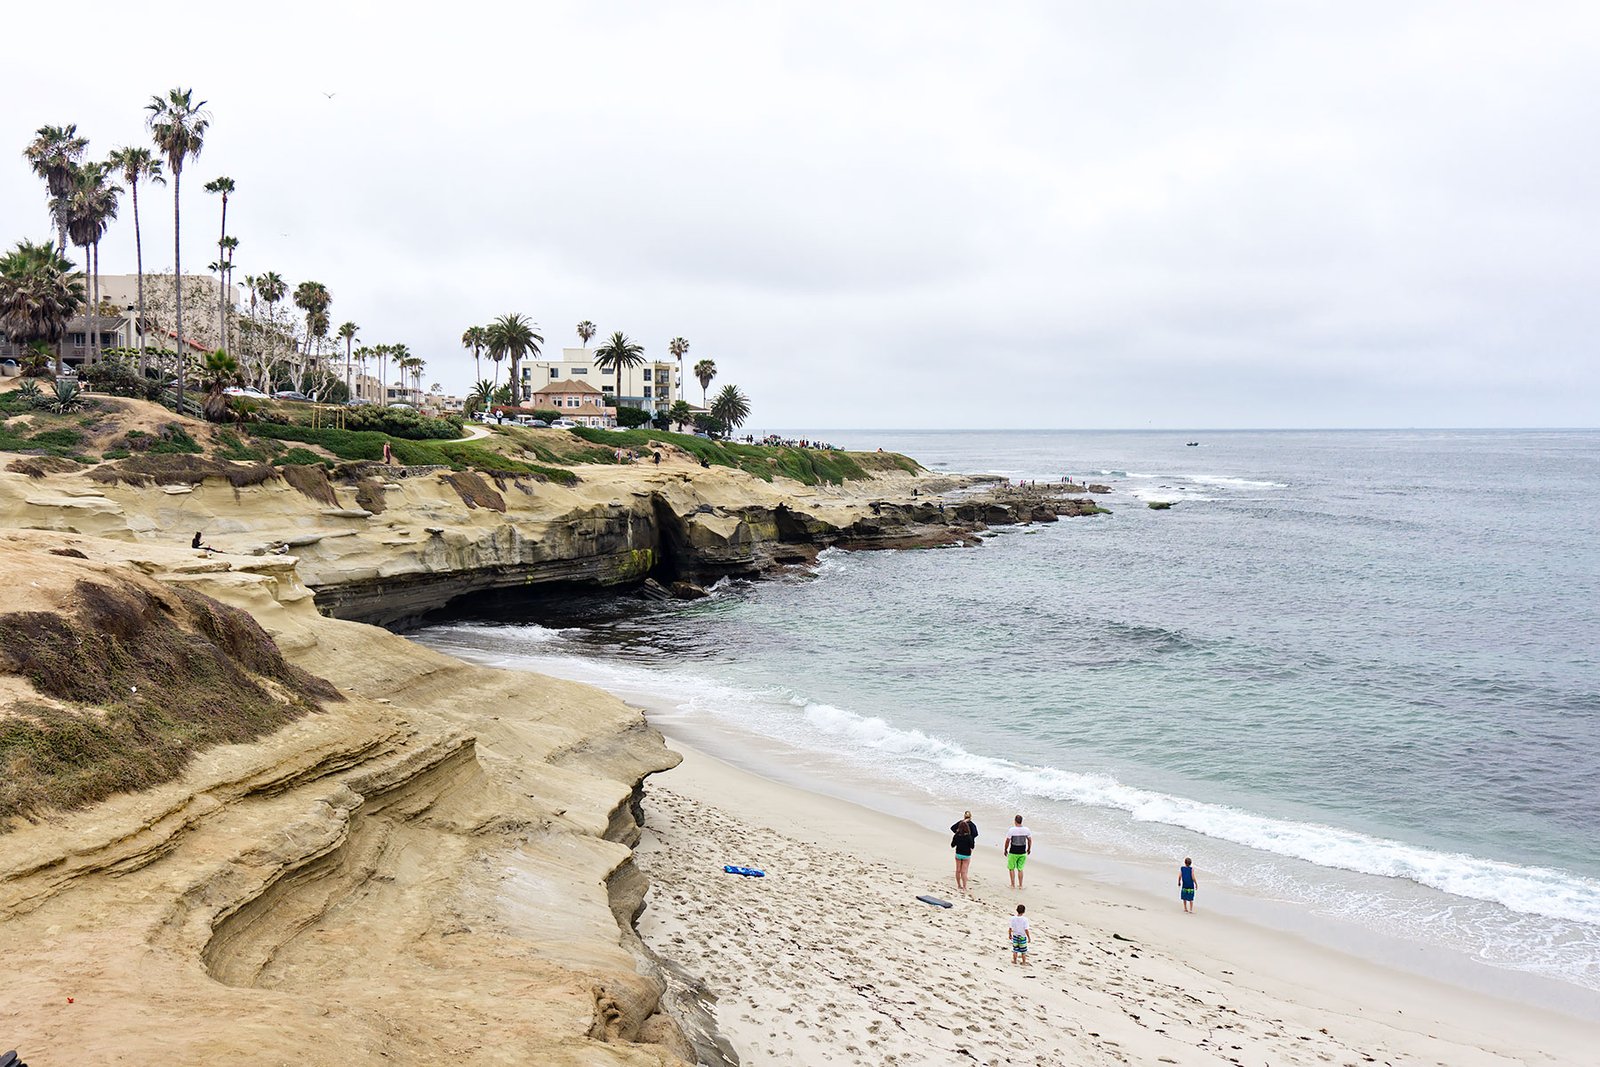 Reviewing the mirrorless Sony A6000 in San Diego and La Jolla